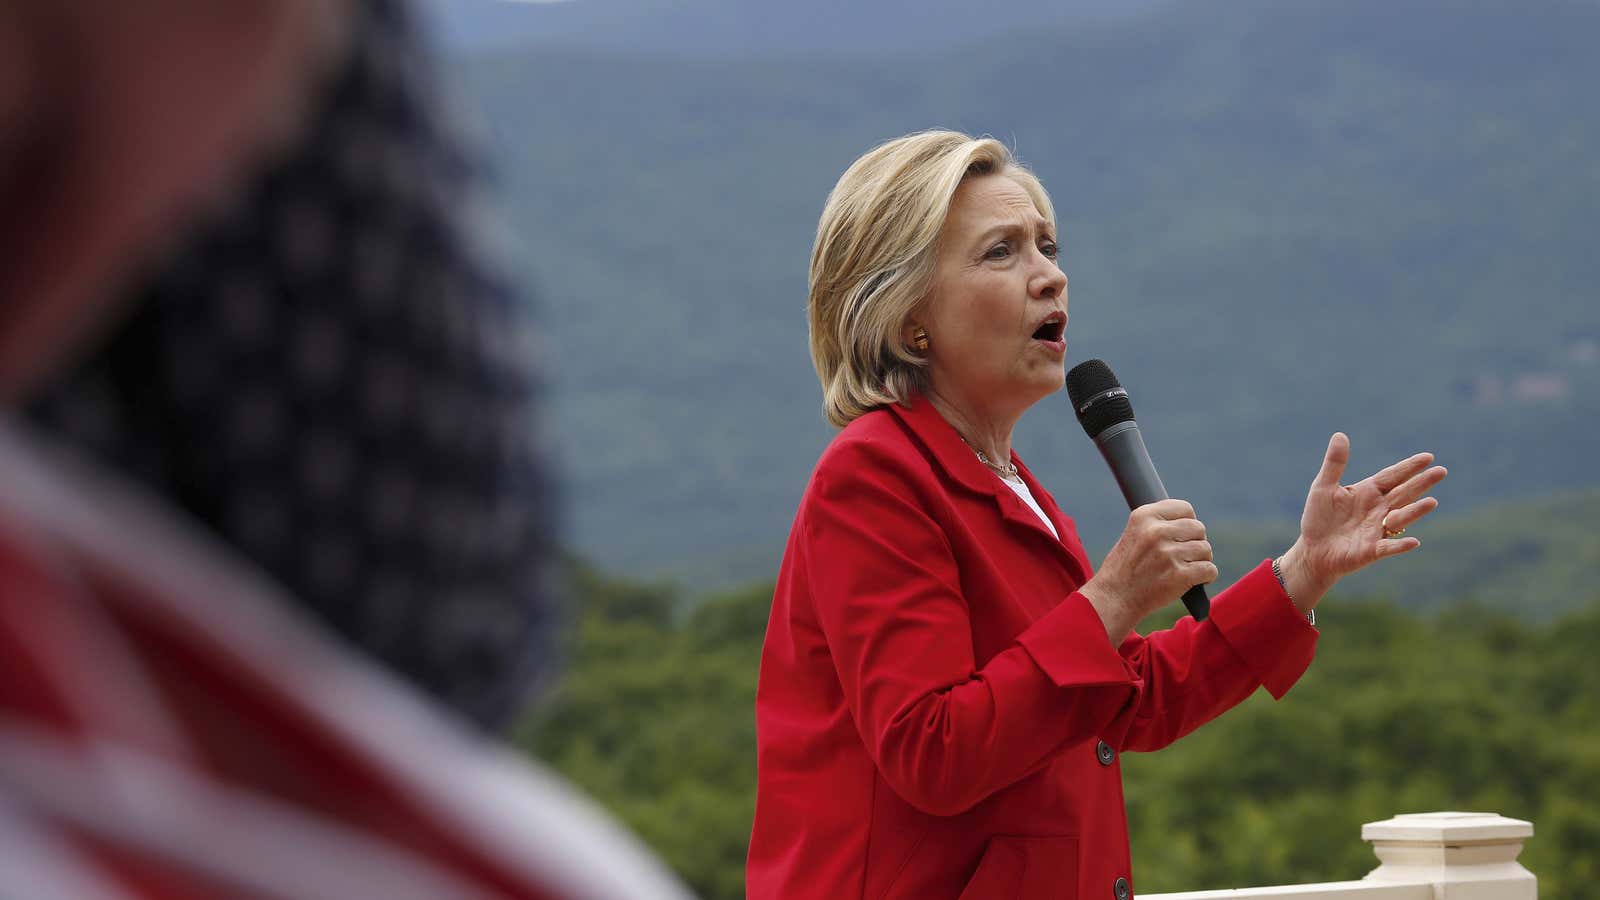 Former US secretary of state and Democratic candidate for president Hillary Clinton warns supporters of an increasingly aggressive China during a campaign event in New Hampshire on July 4, 2015.